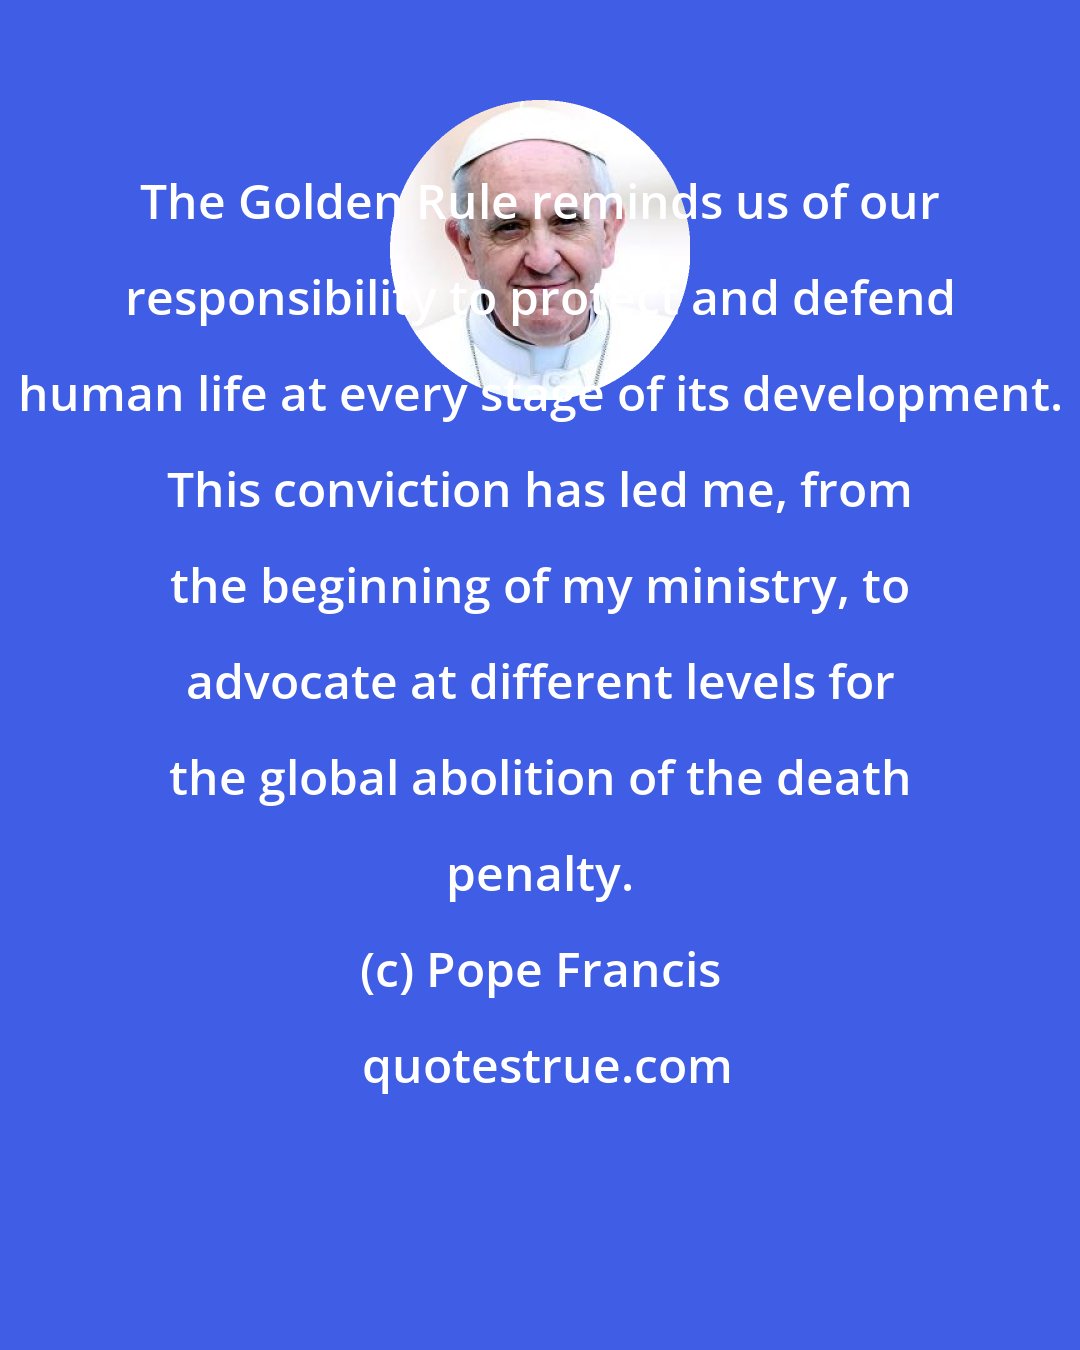 Pope Francis: The Golden Rule reminds us of our responsibility to protect and defend human life at every stage of its development. This conviction has led me, from the beginning of my ministry, to advocate at different levels for the global abolition of the death penalty.